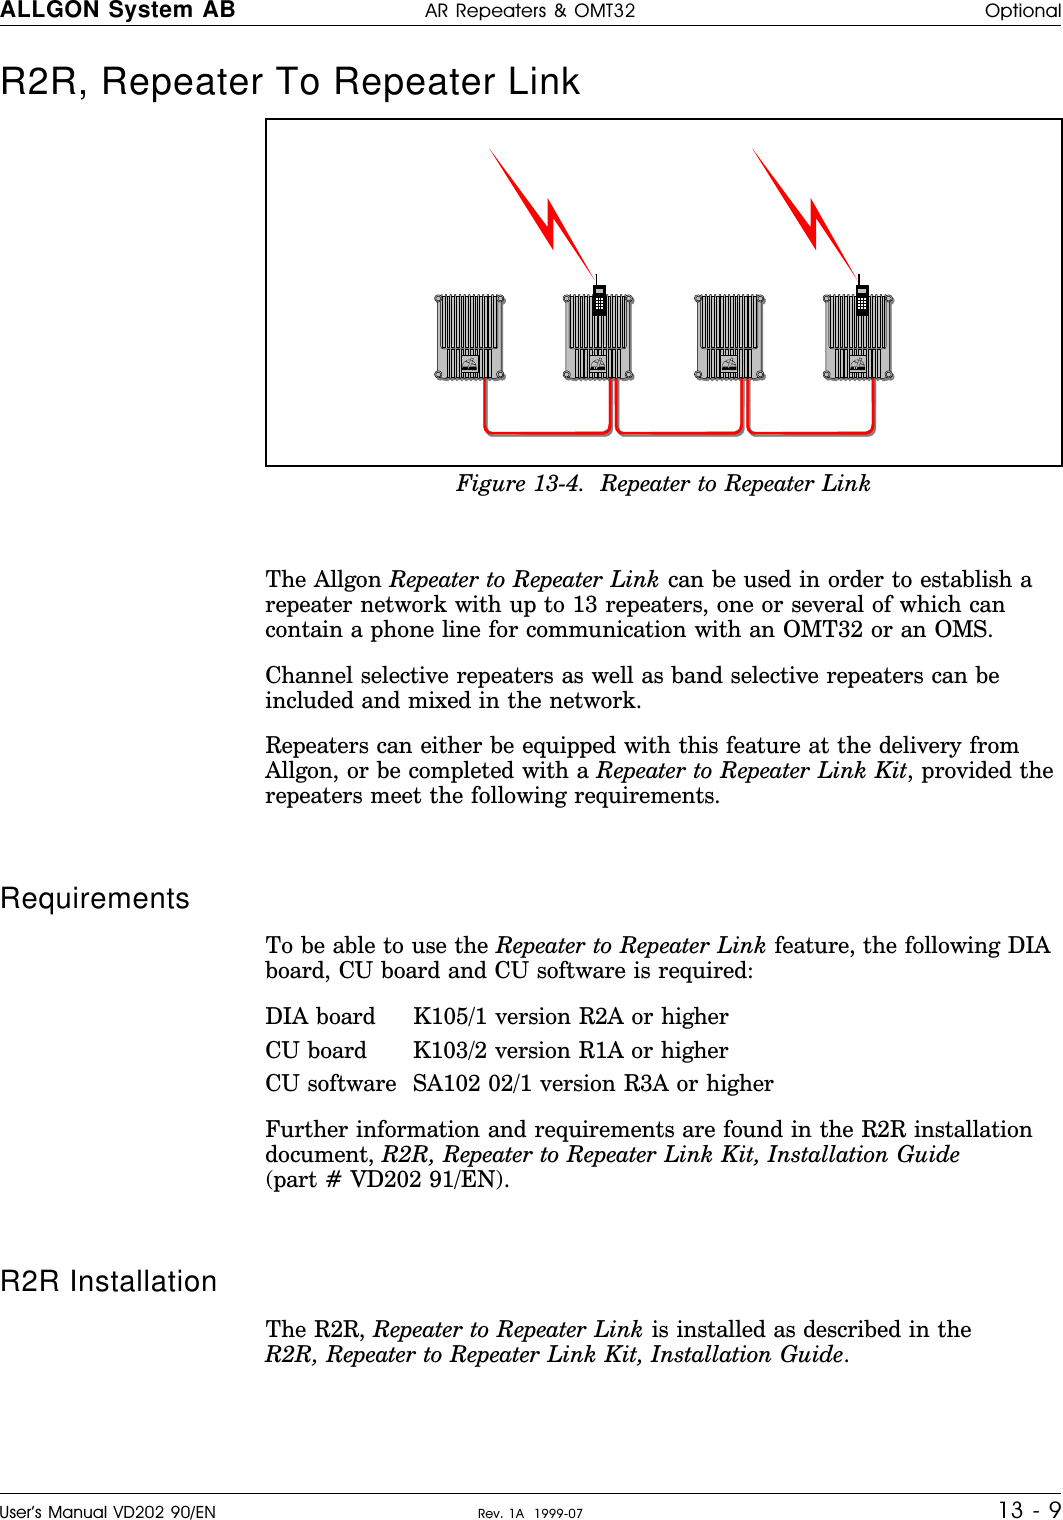 R2R, Repeater To Repeater Link  The Allgon Repeater to Repeater Link can be used in order to establish arepeater network with up to 13 repeaters, one or several of which cancontain a phone line for communication with an OMT32 or an OMS.Channel selective repeaters as well as band selective repeaters can beincluded and mixed in the network.Repeaters can either be equipped with this feature at the delivery fromAllgon, or be completed with a Repeater to Repeater Link Kit, provided therepeaters meet the following requirements.RequirementsTo be able to use the Repeater to Repeater Link feature, the following DIAboard, CU board and CU software is required:DIA board K105/1 version R2A or higherCU board K103/2 version R1A or higherCU software SA102 02/1 version R3A or higherFurther information and requirements are found in the R2R installationdocument, R2R, Repeater to Repeater Link Kit, Installation Guide(part # VD202 91/EN).R2R InstallationThe R2R, Repeater to Repeater Link is installed as described in the R2R, Repeater to Repeater Link Kit, Installation Guide.Figure 13-4.  Repeater to Repeater LinkALLGON System AB AR Repeaters &amp; OMT32 OptionalUser’s Manual VD202 90/EN Rev. 1A  1999-07 13 - 9